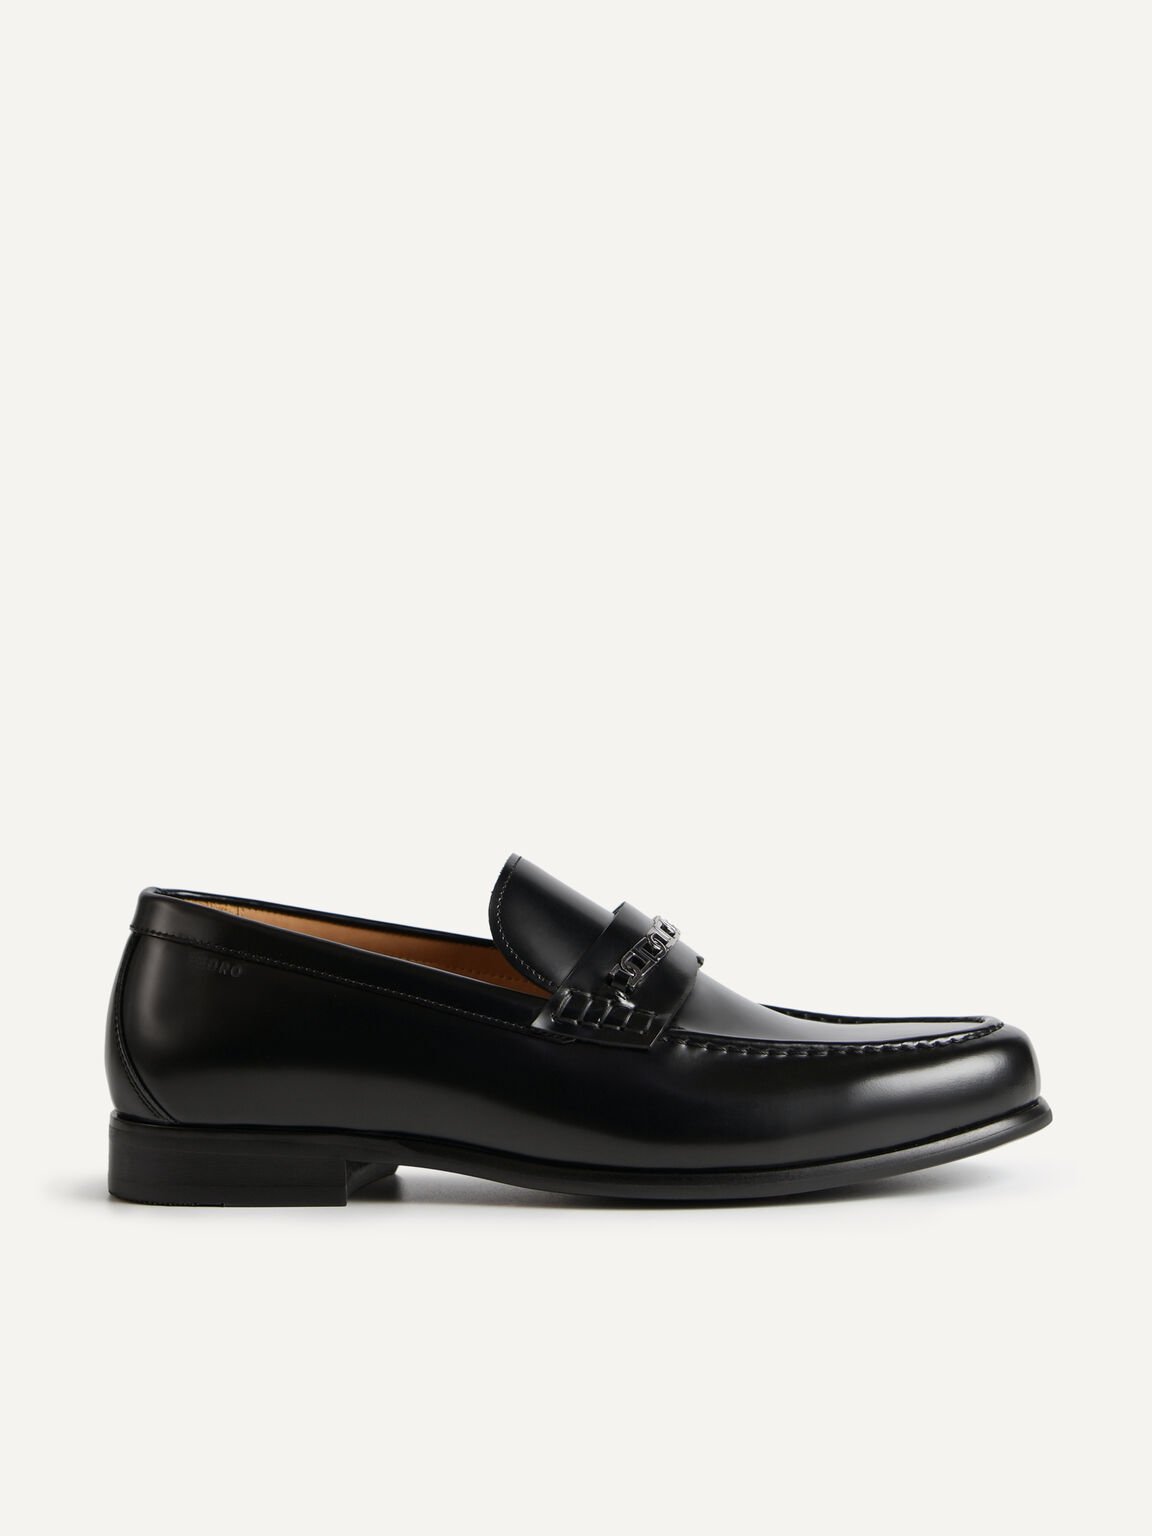 Black Icon Leather Penny Loafers - PEDRO SG